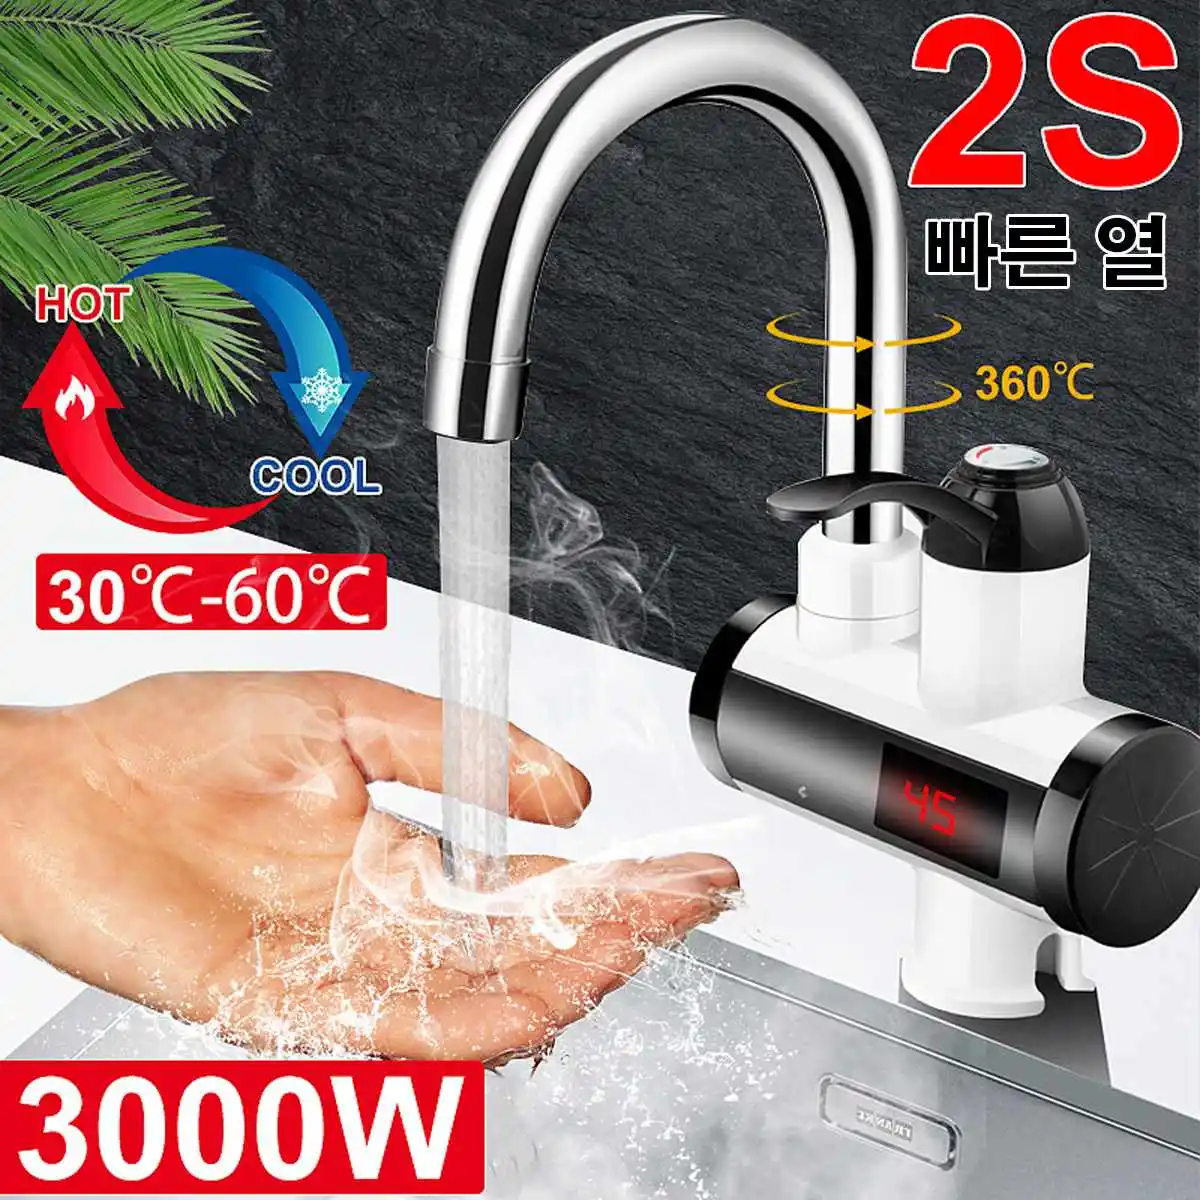 

3000W Instant Electric Heating Faucet Cold&Hot Mixer Temperature Digital Display Bathroom Kitchen Single Handle Water Tap